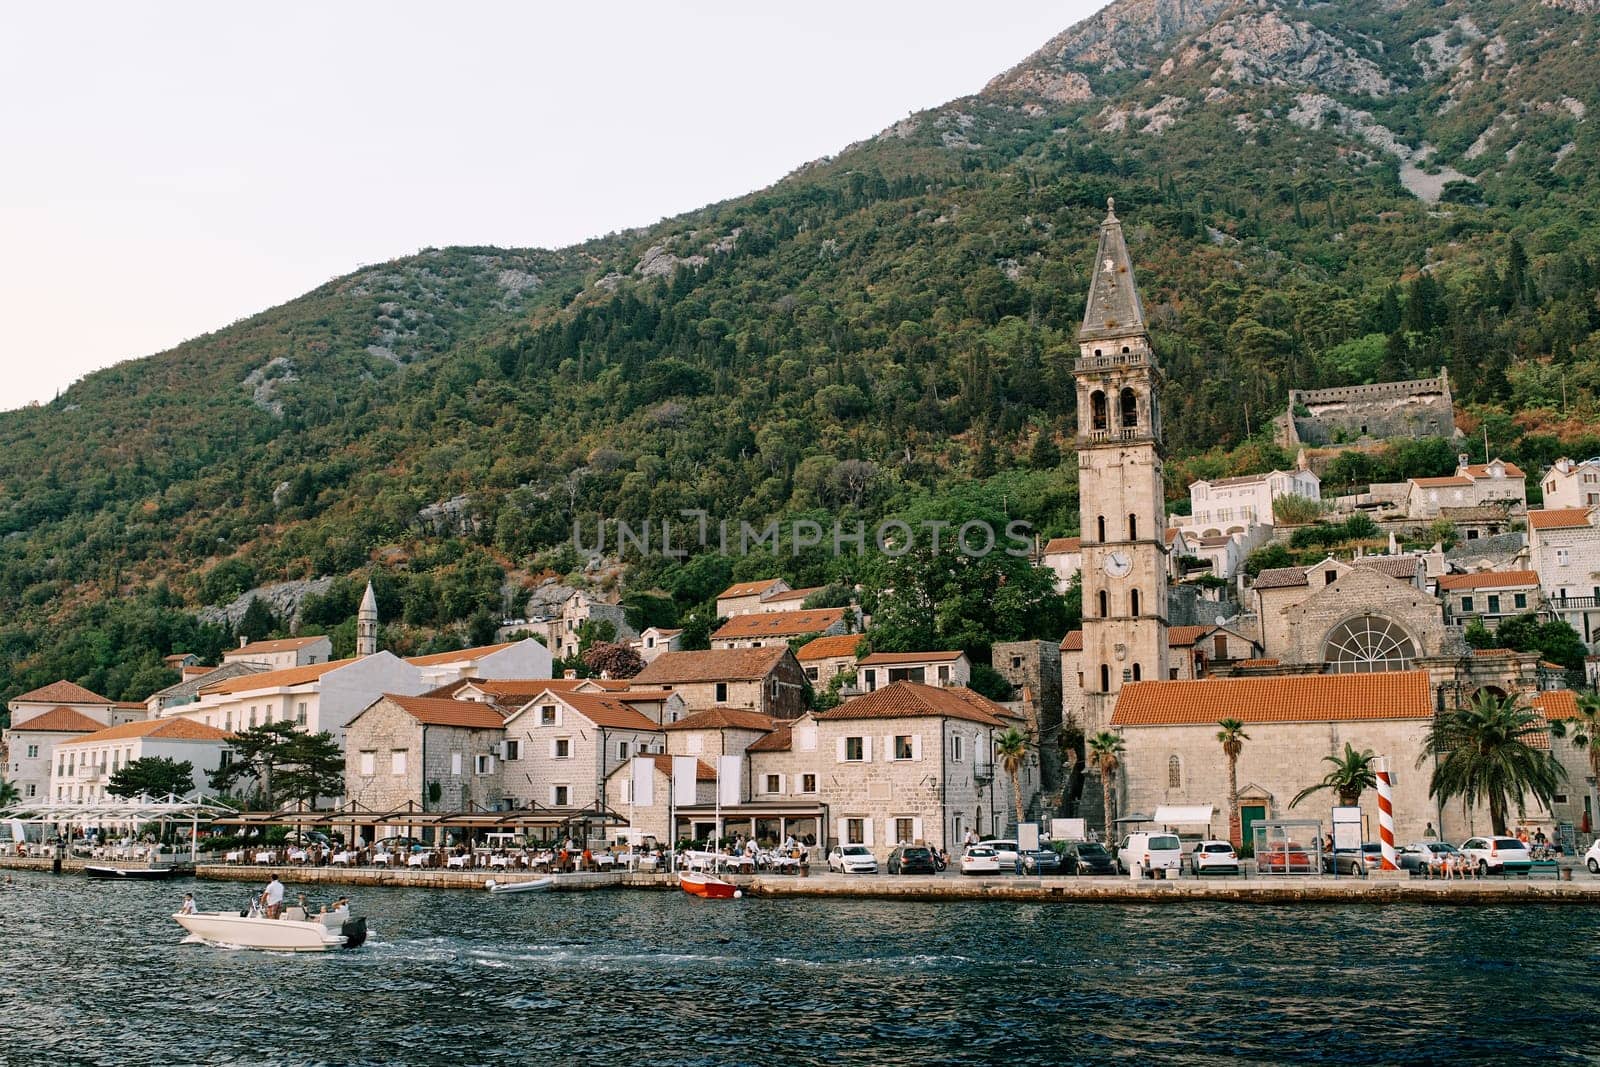 Motor boat sails along the shore with ancient houses and a bell tower. Perast, Montenegro by Nadtochiy